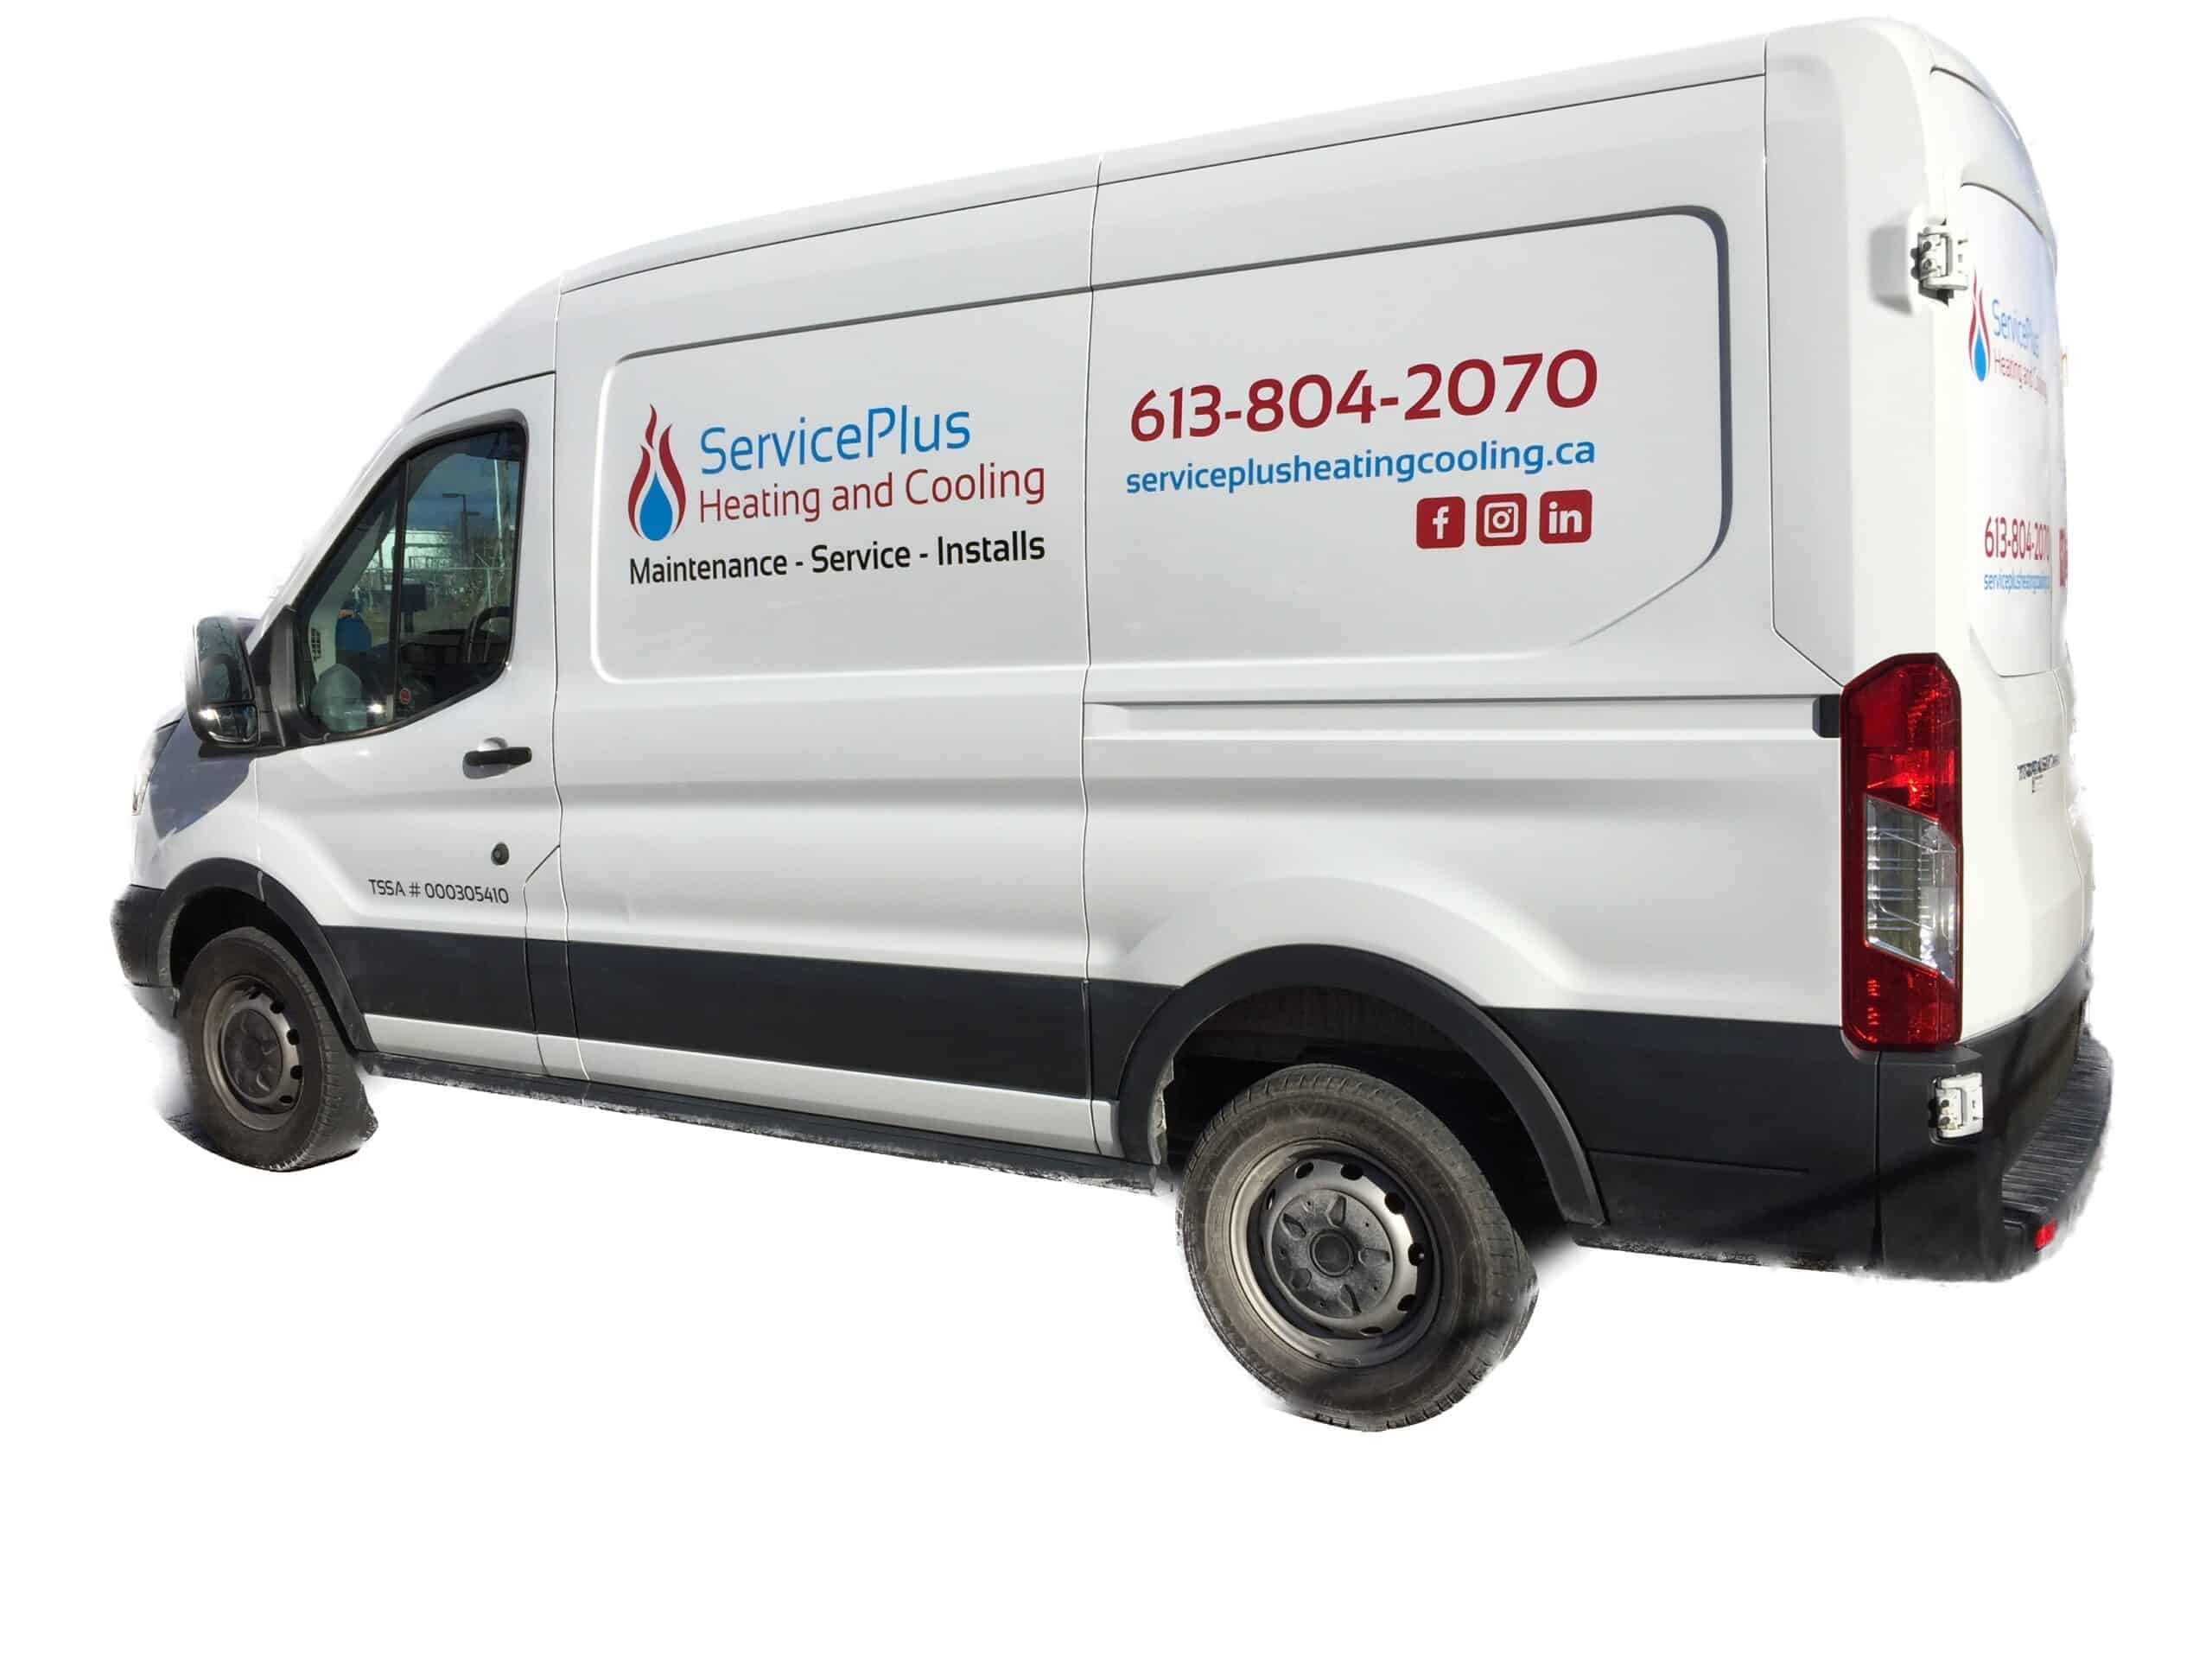 ServicePlus Heating and Cooling Service Truck